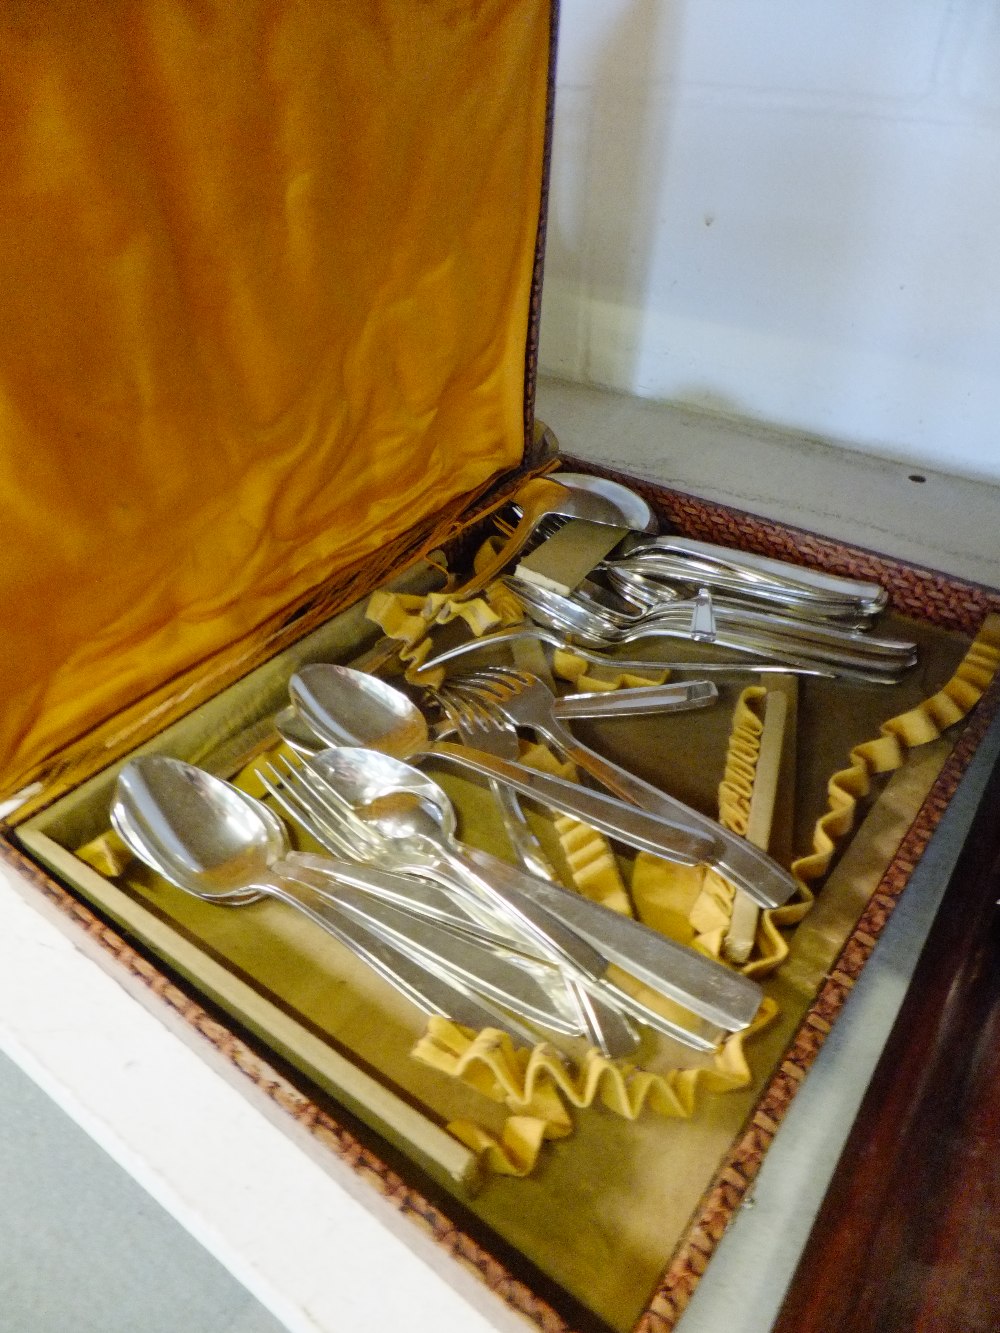 A mixed selection of cutlery